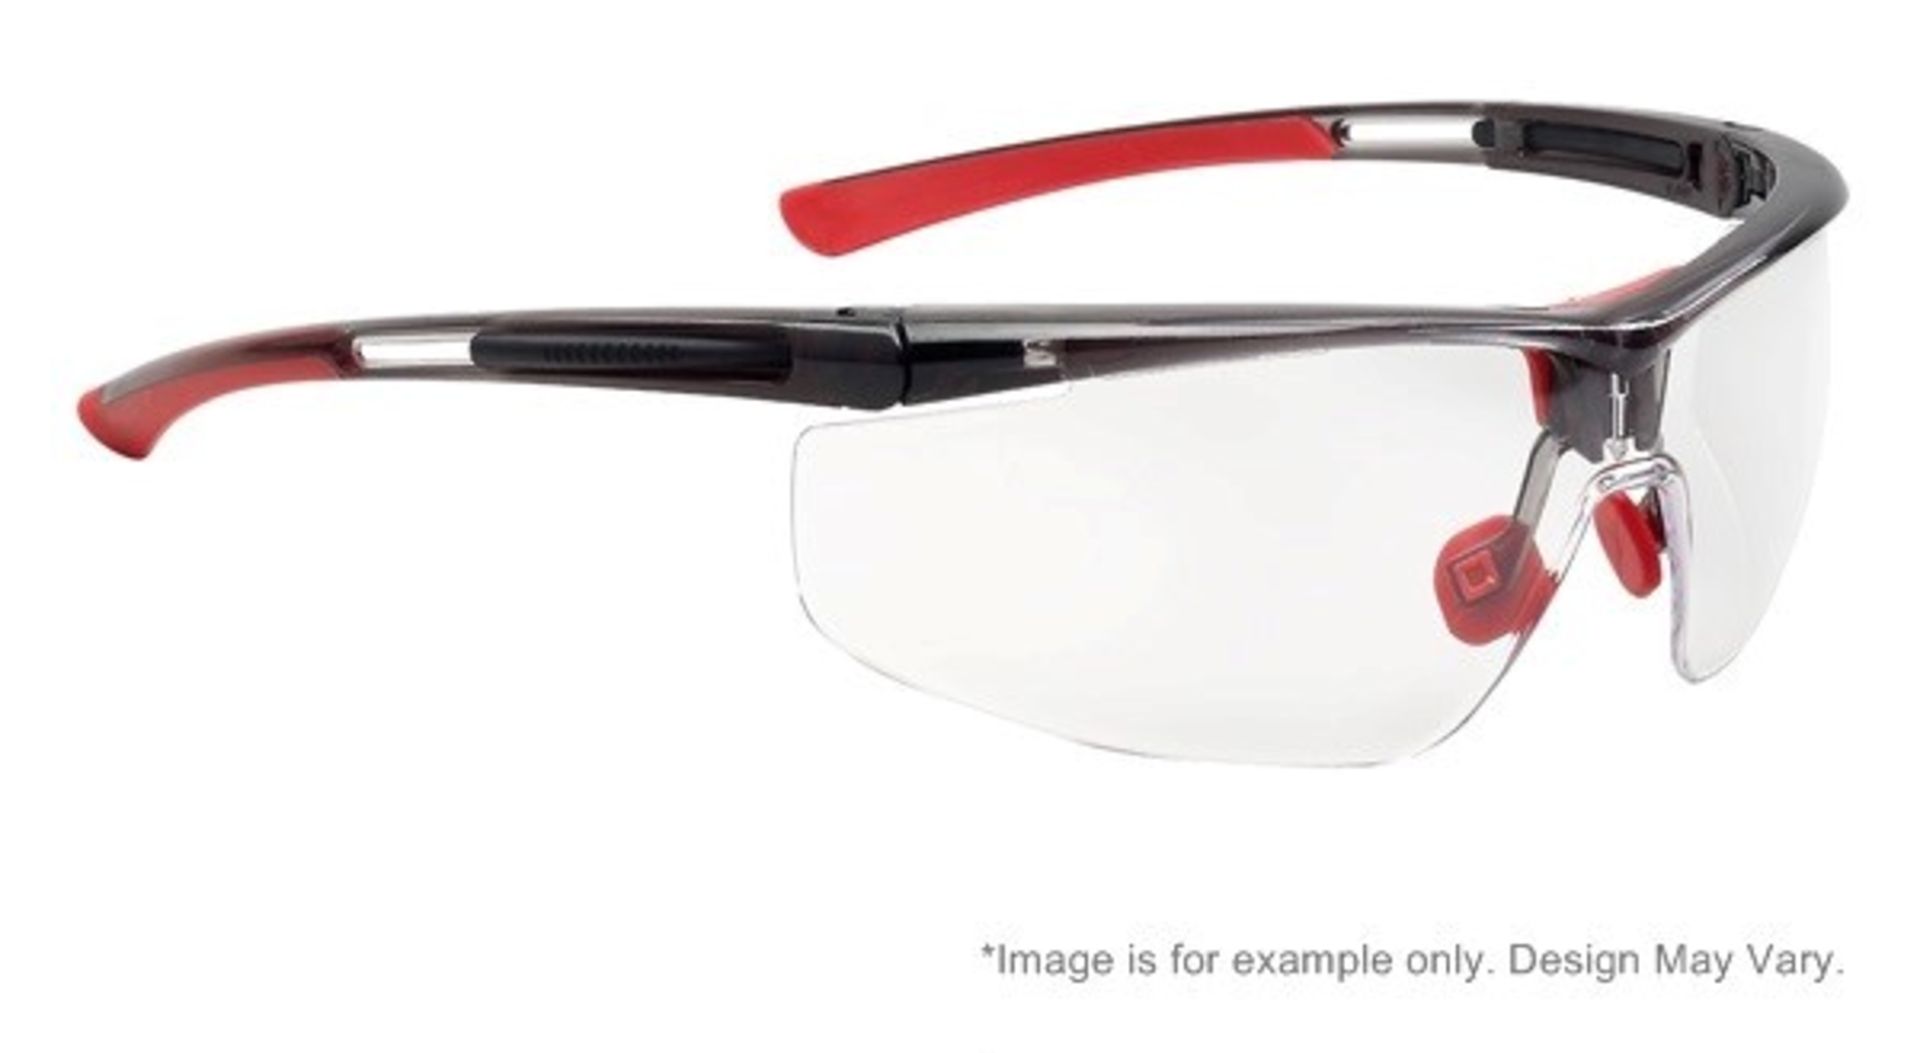 3 x Pairs Of Honeywell Adaptec Safety Glasses - Features Clear Lens With 4A+ Coating - Black/Red